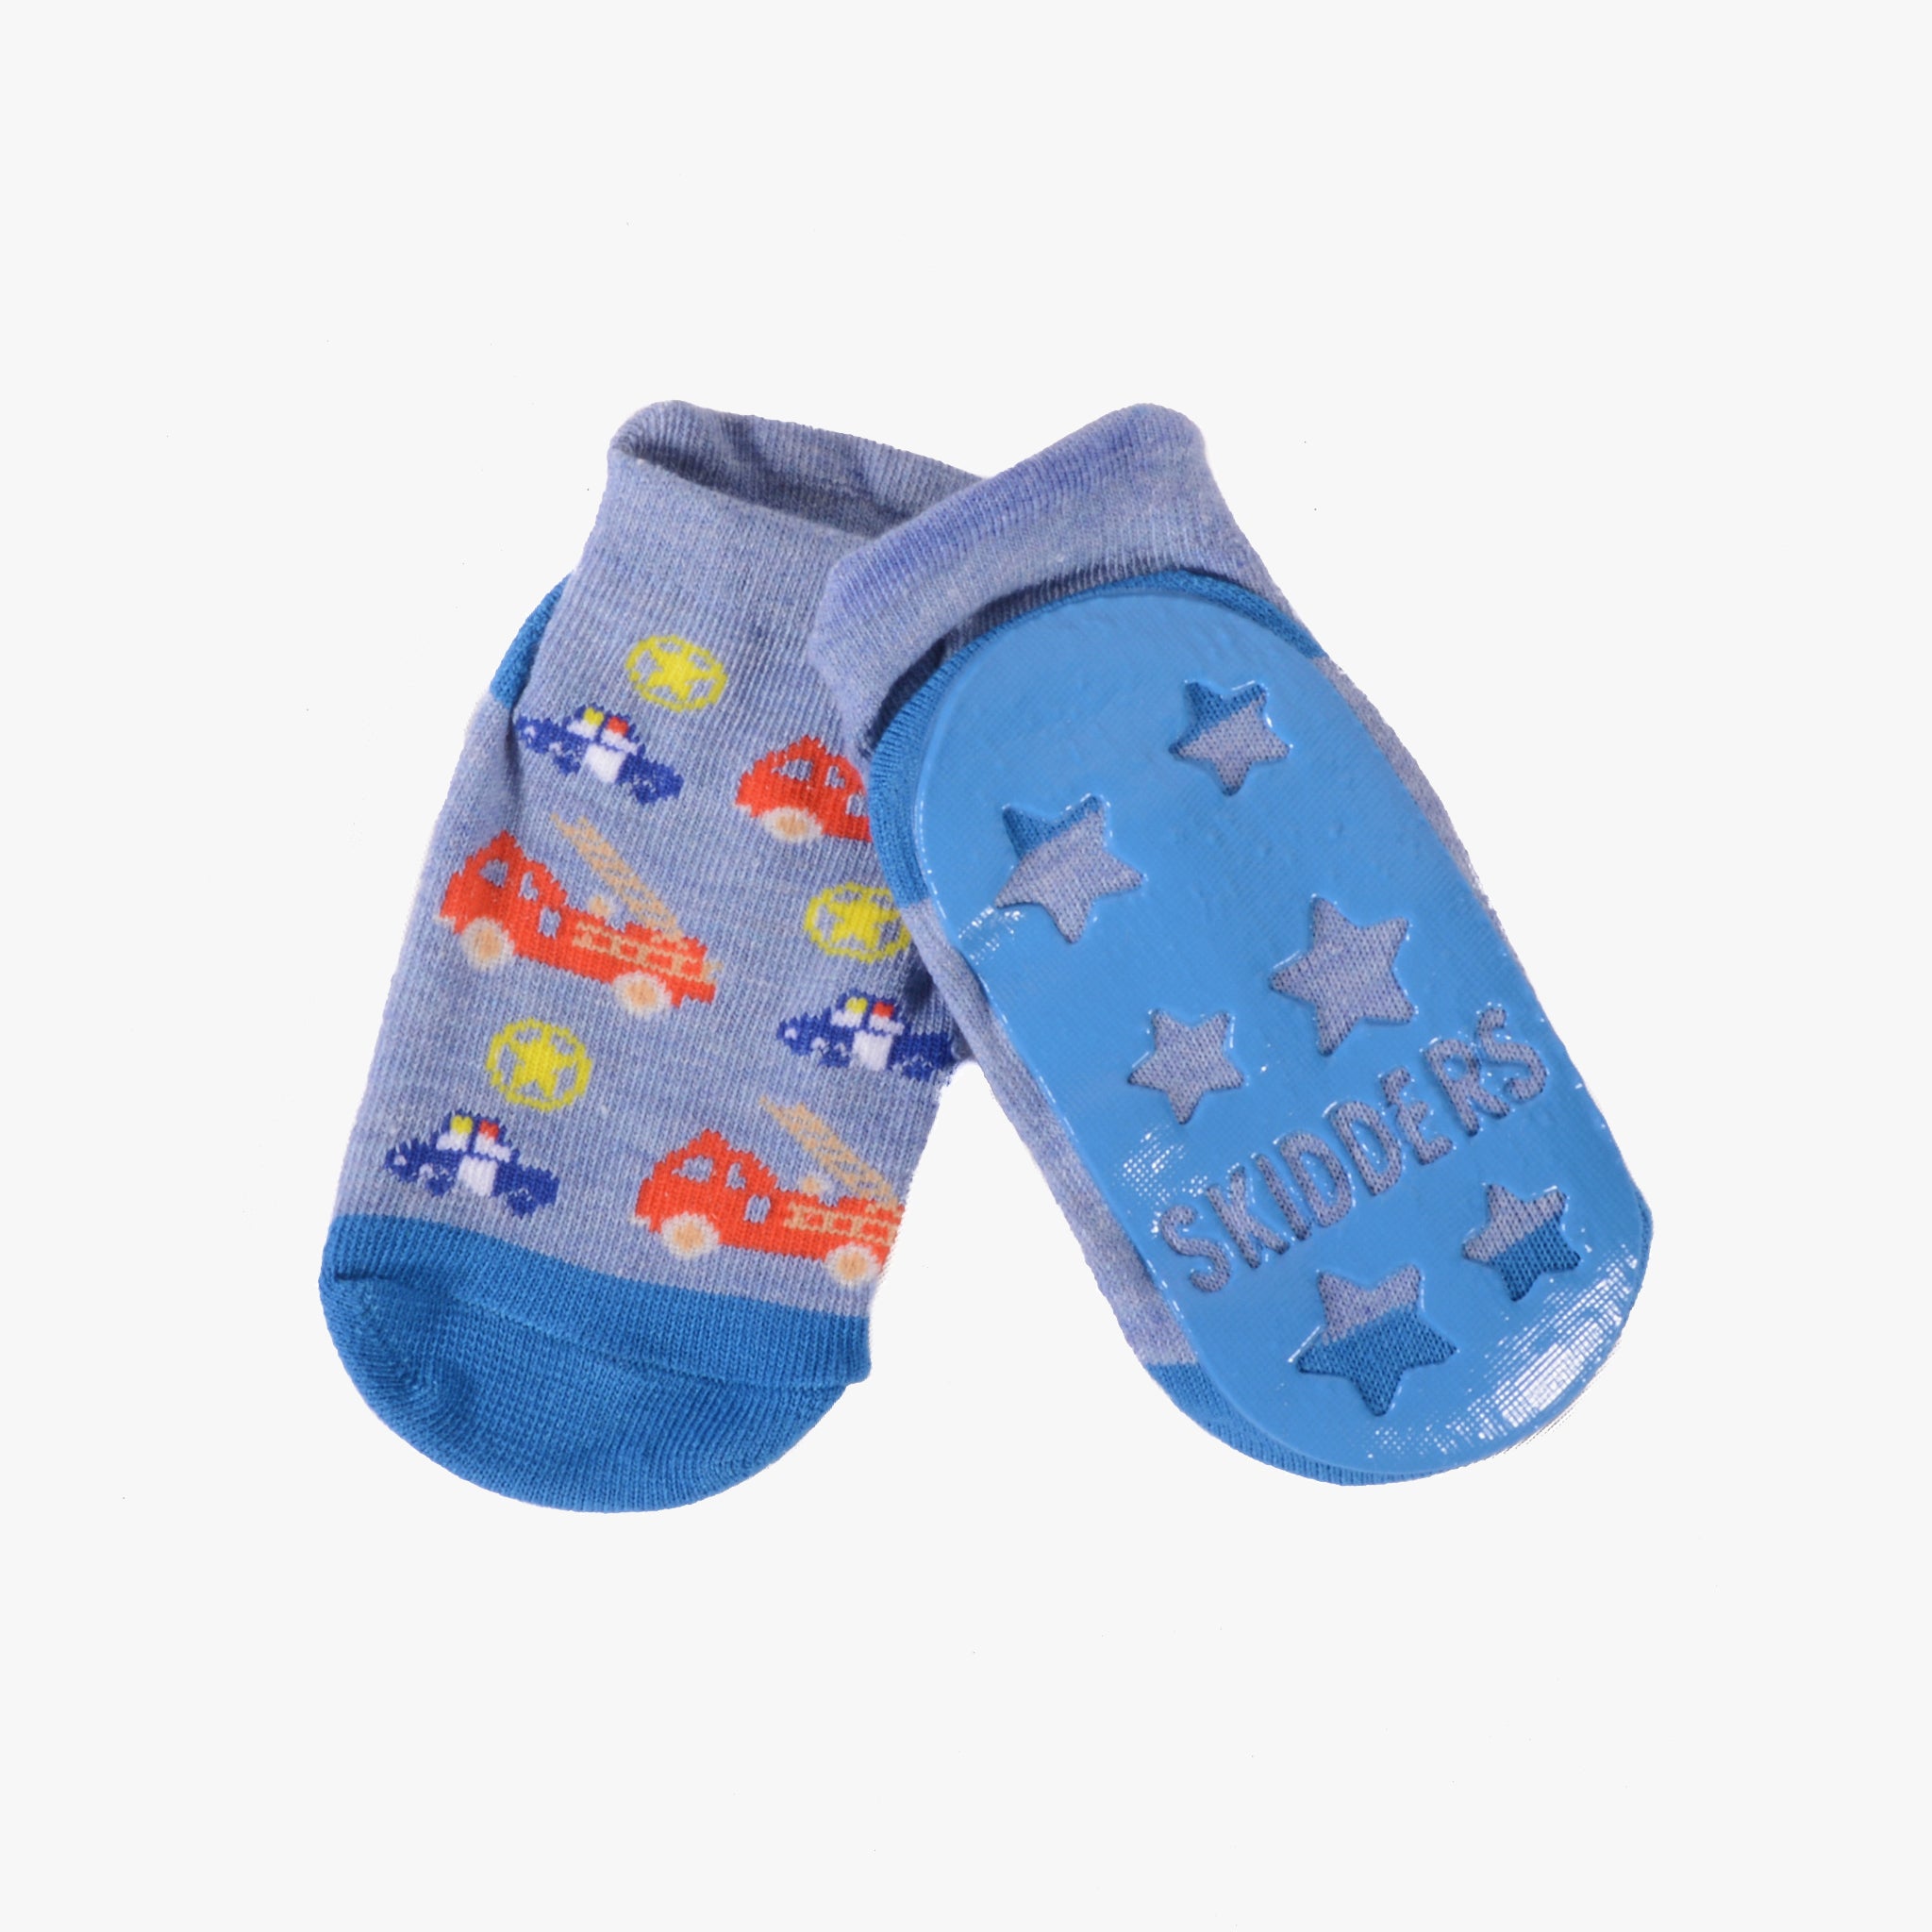 Why Kids Grip Socks Are a Must-Have for Active Children?